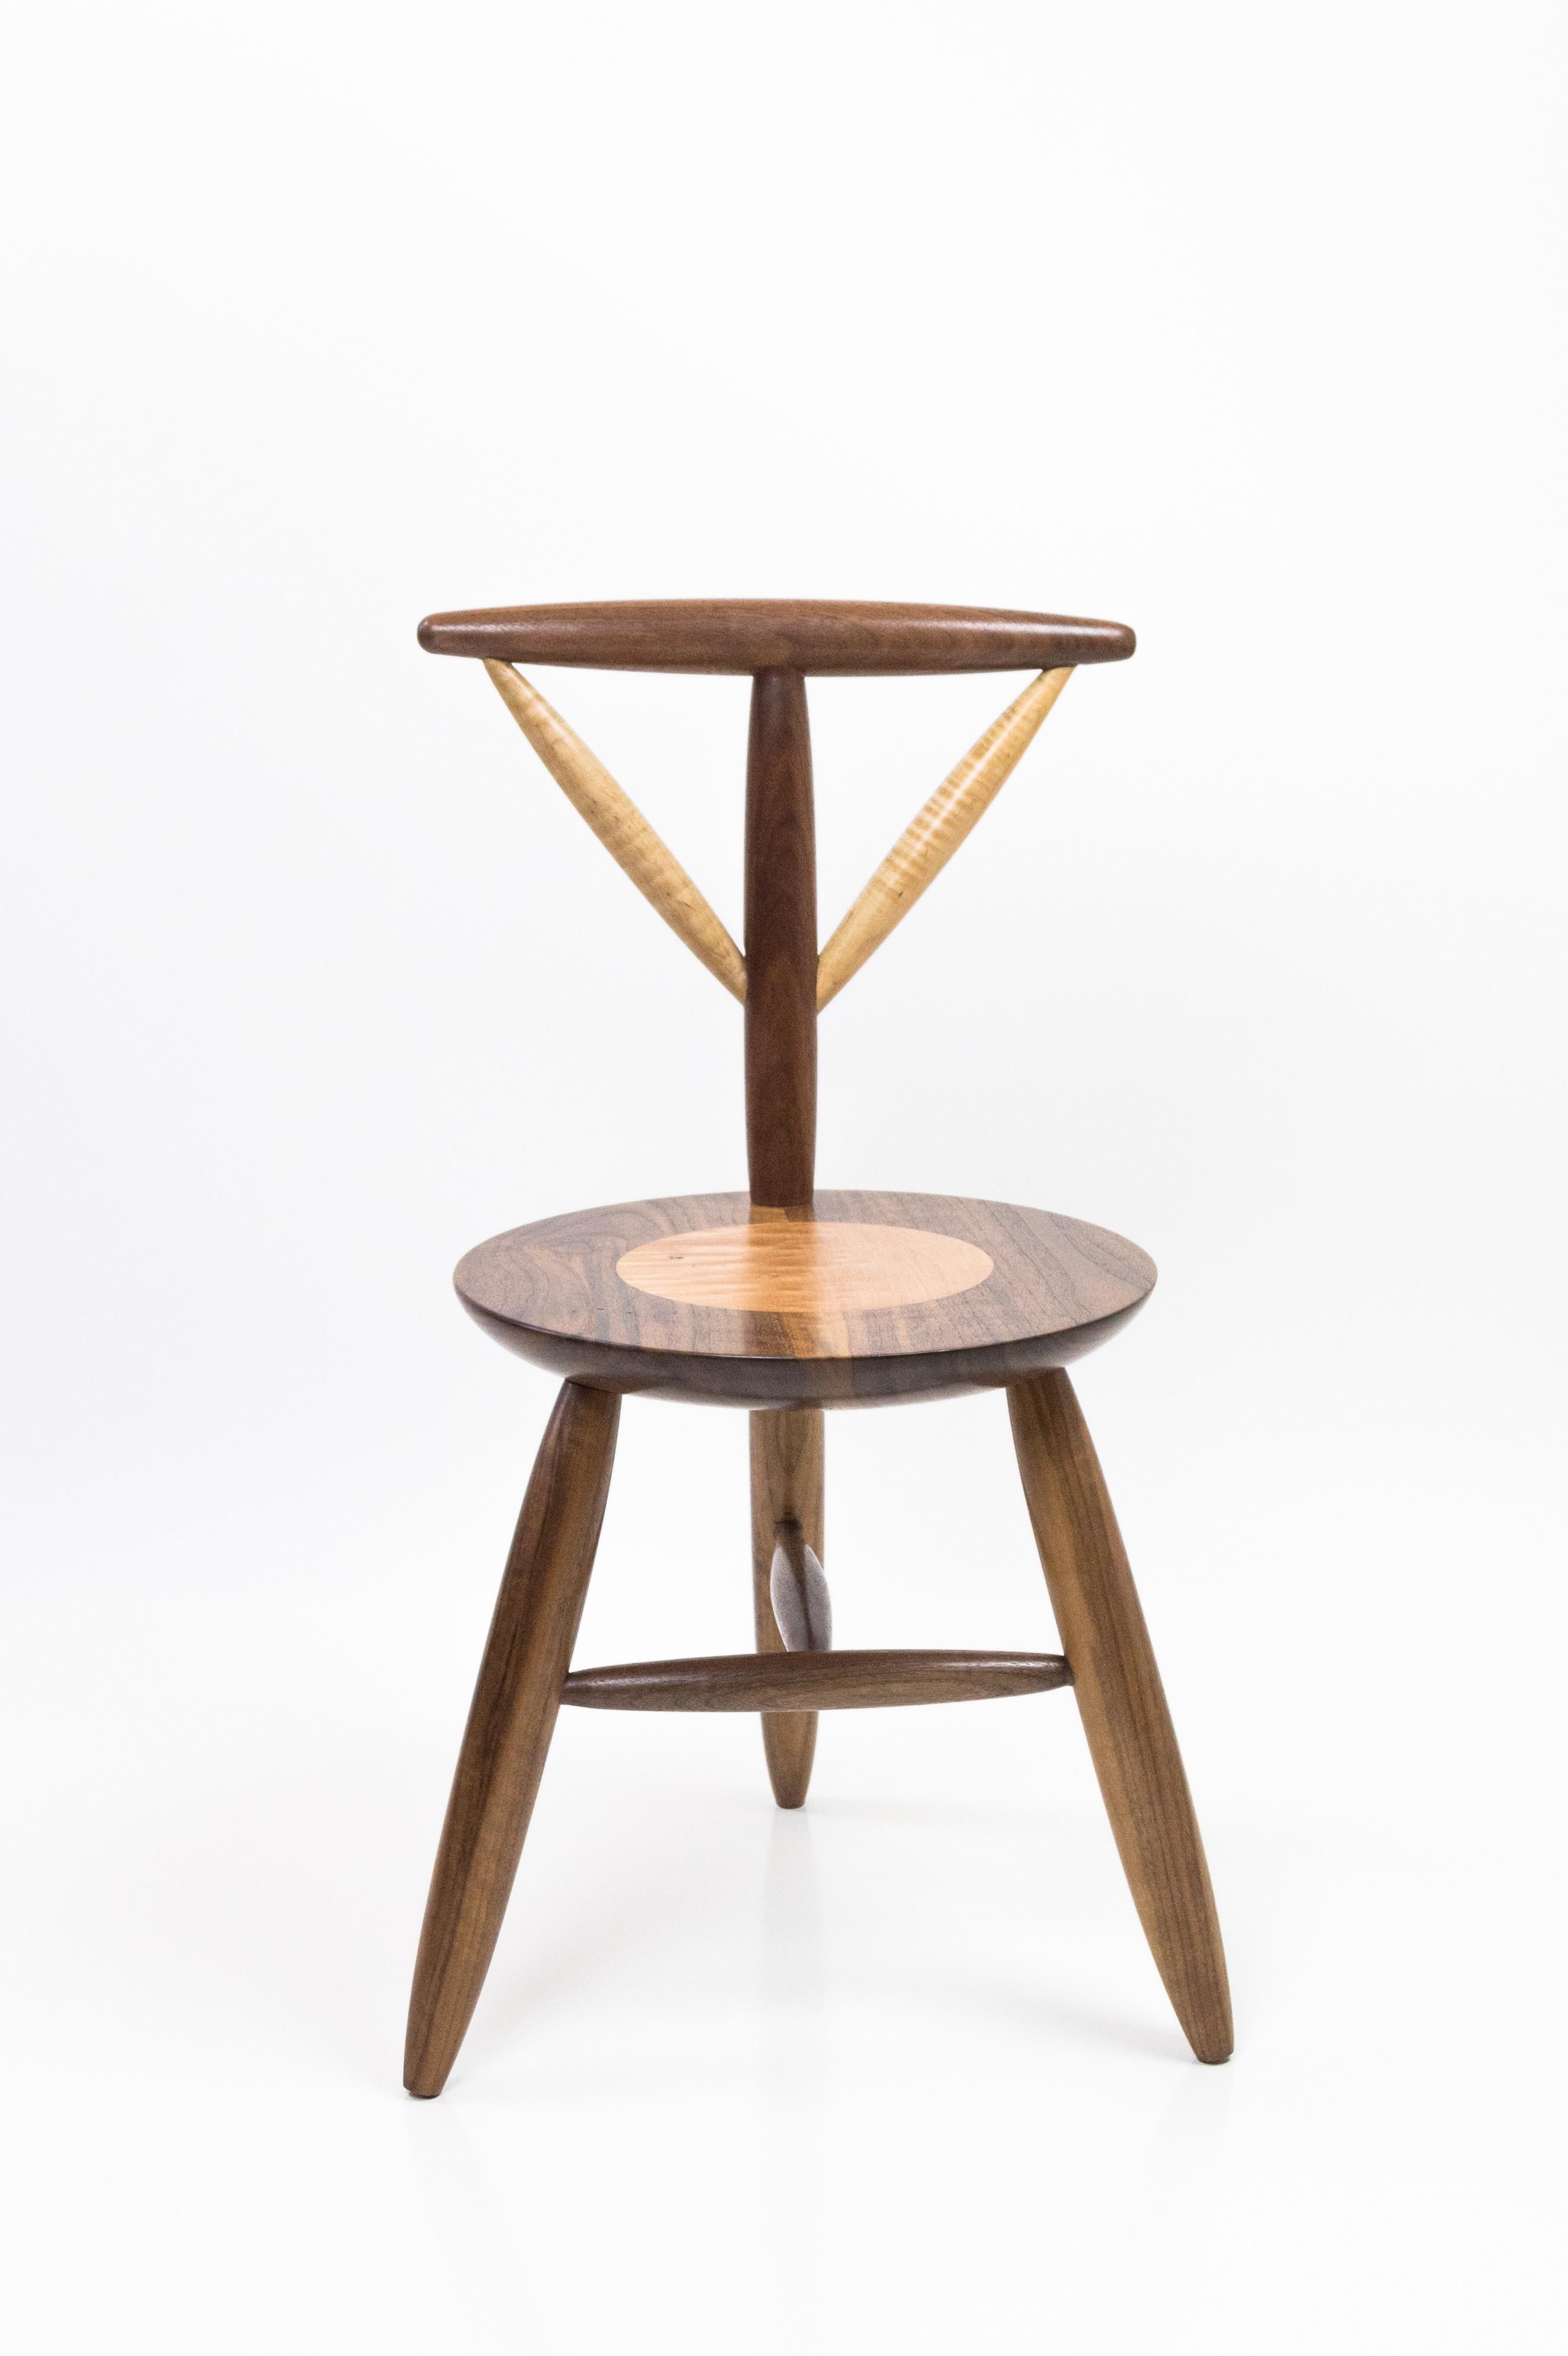 Inlay Inlaid Chair with Exquisite Joinery in Walnut and Maple by Birnam Wood Studio